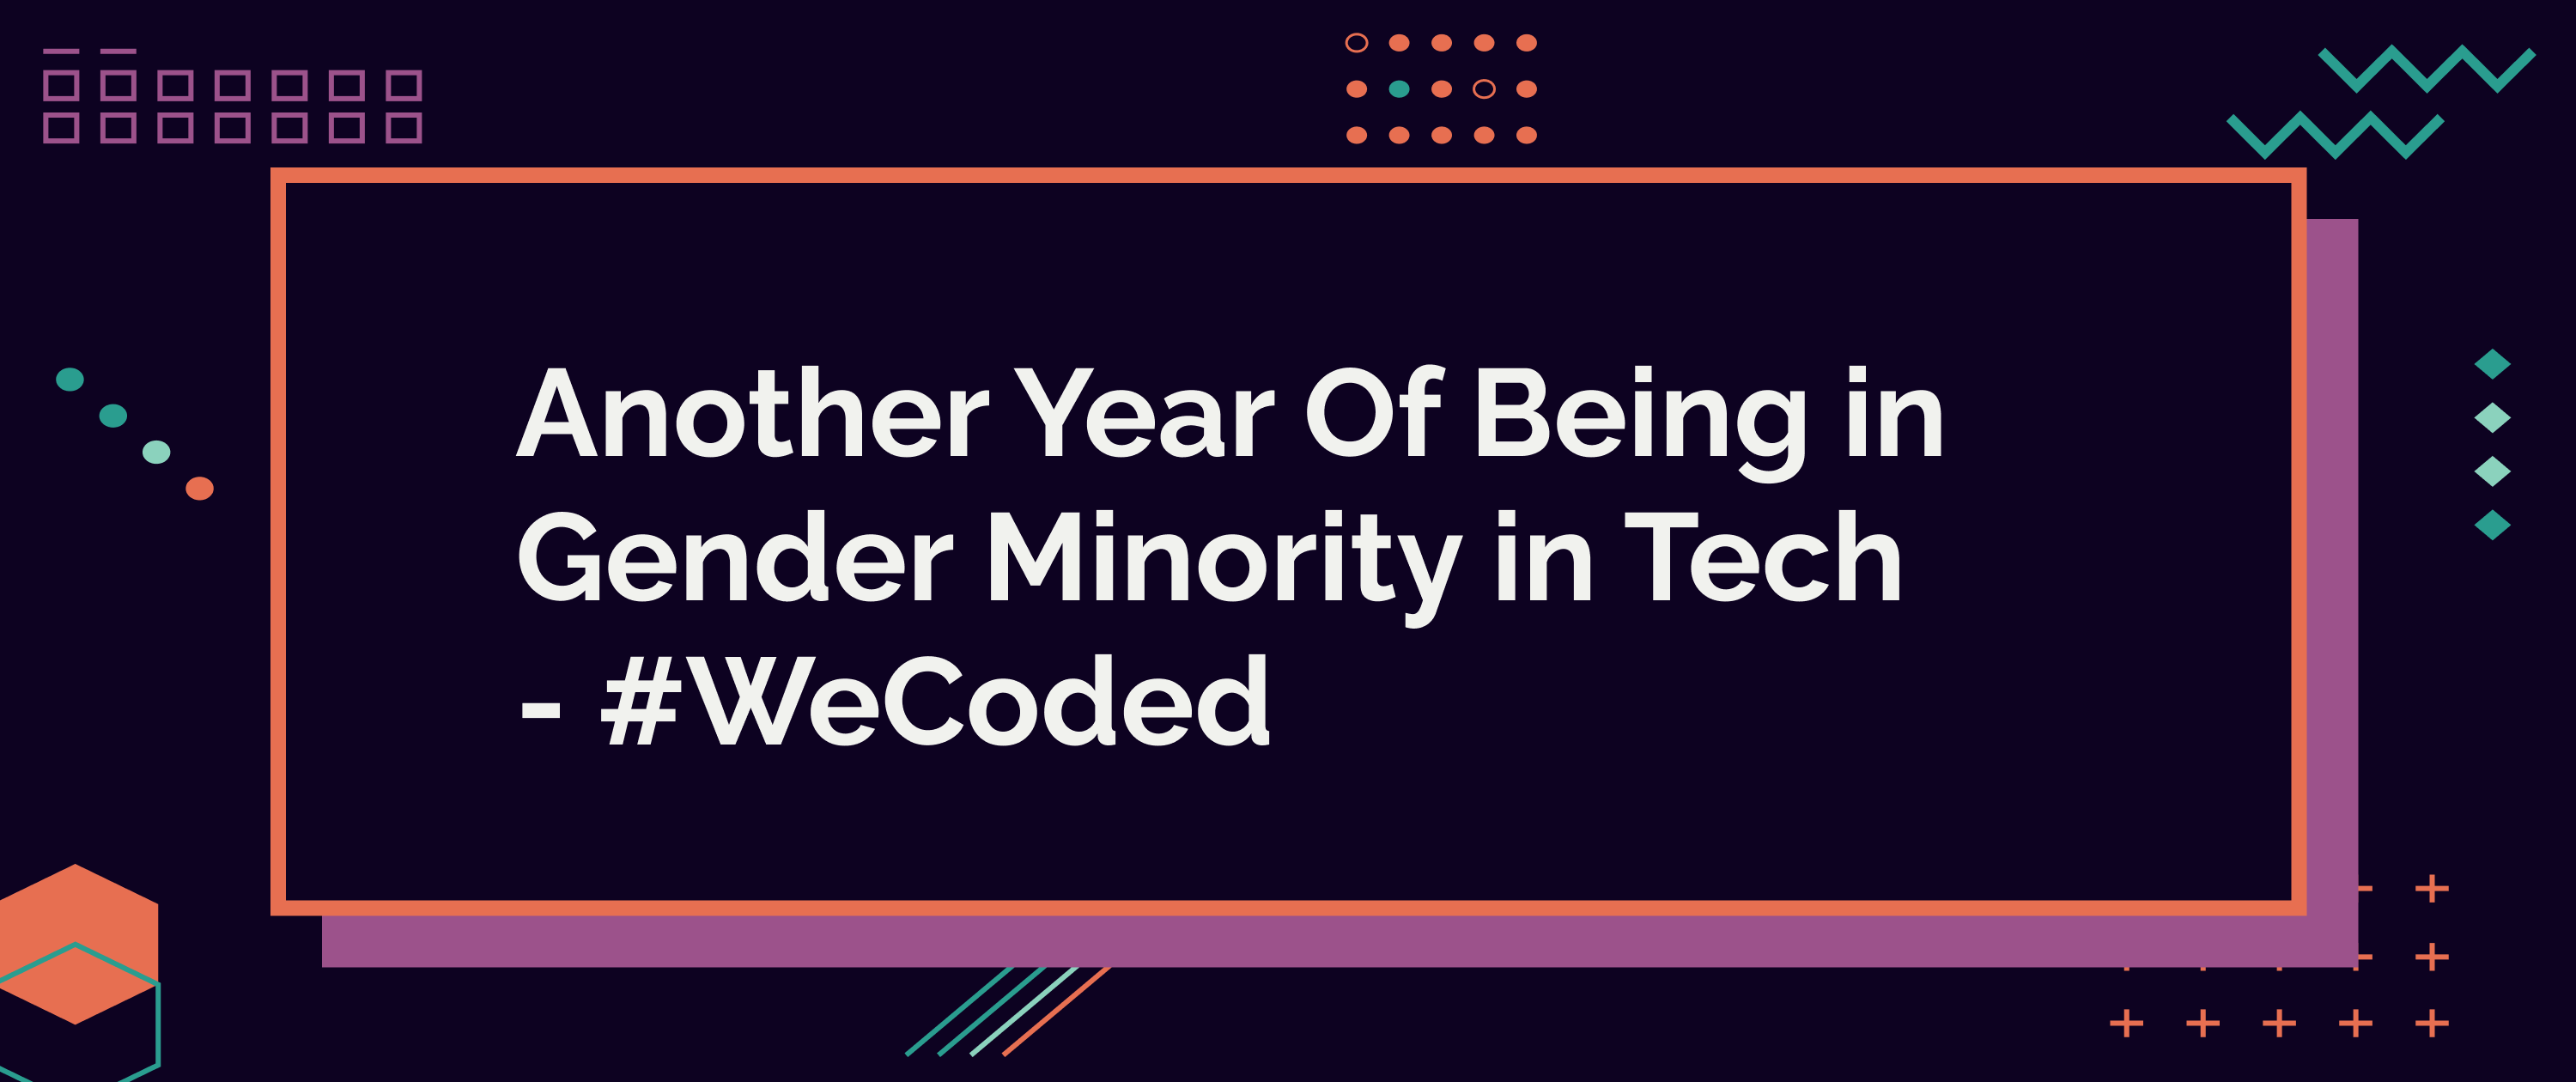 Another Year Of Being in Gender Minority in Tech